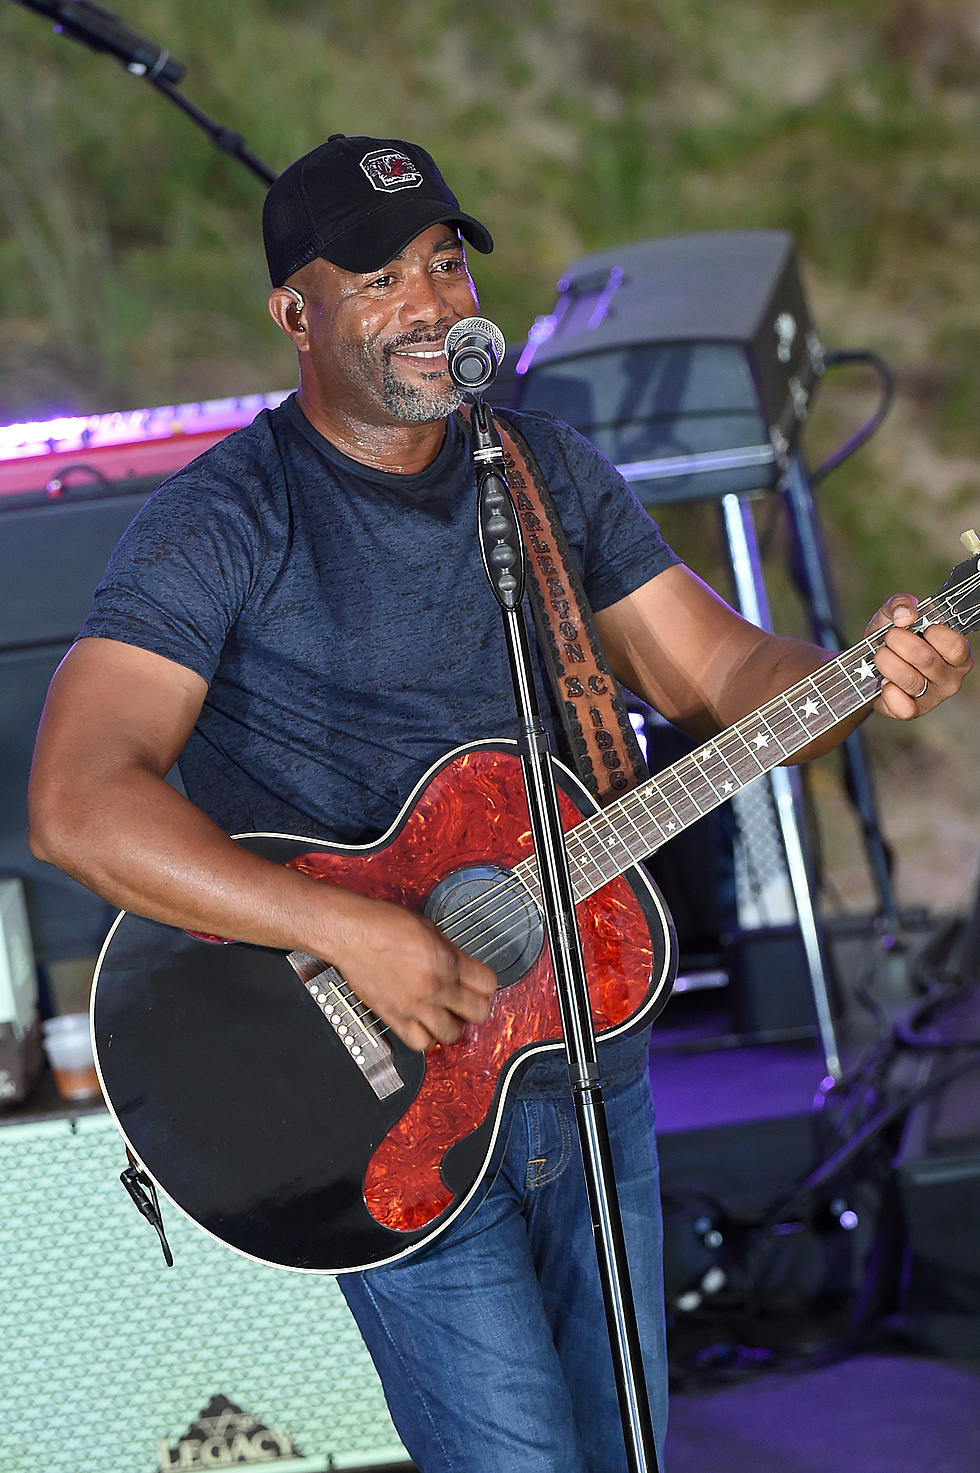 $25 Student Discount Offered for Darius Rucker TUC Concert